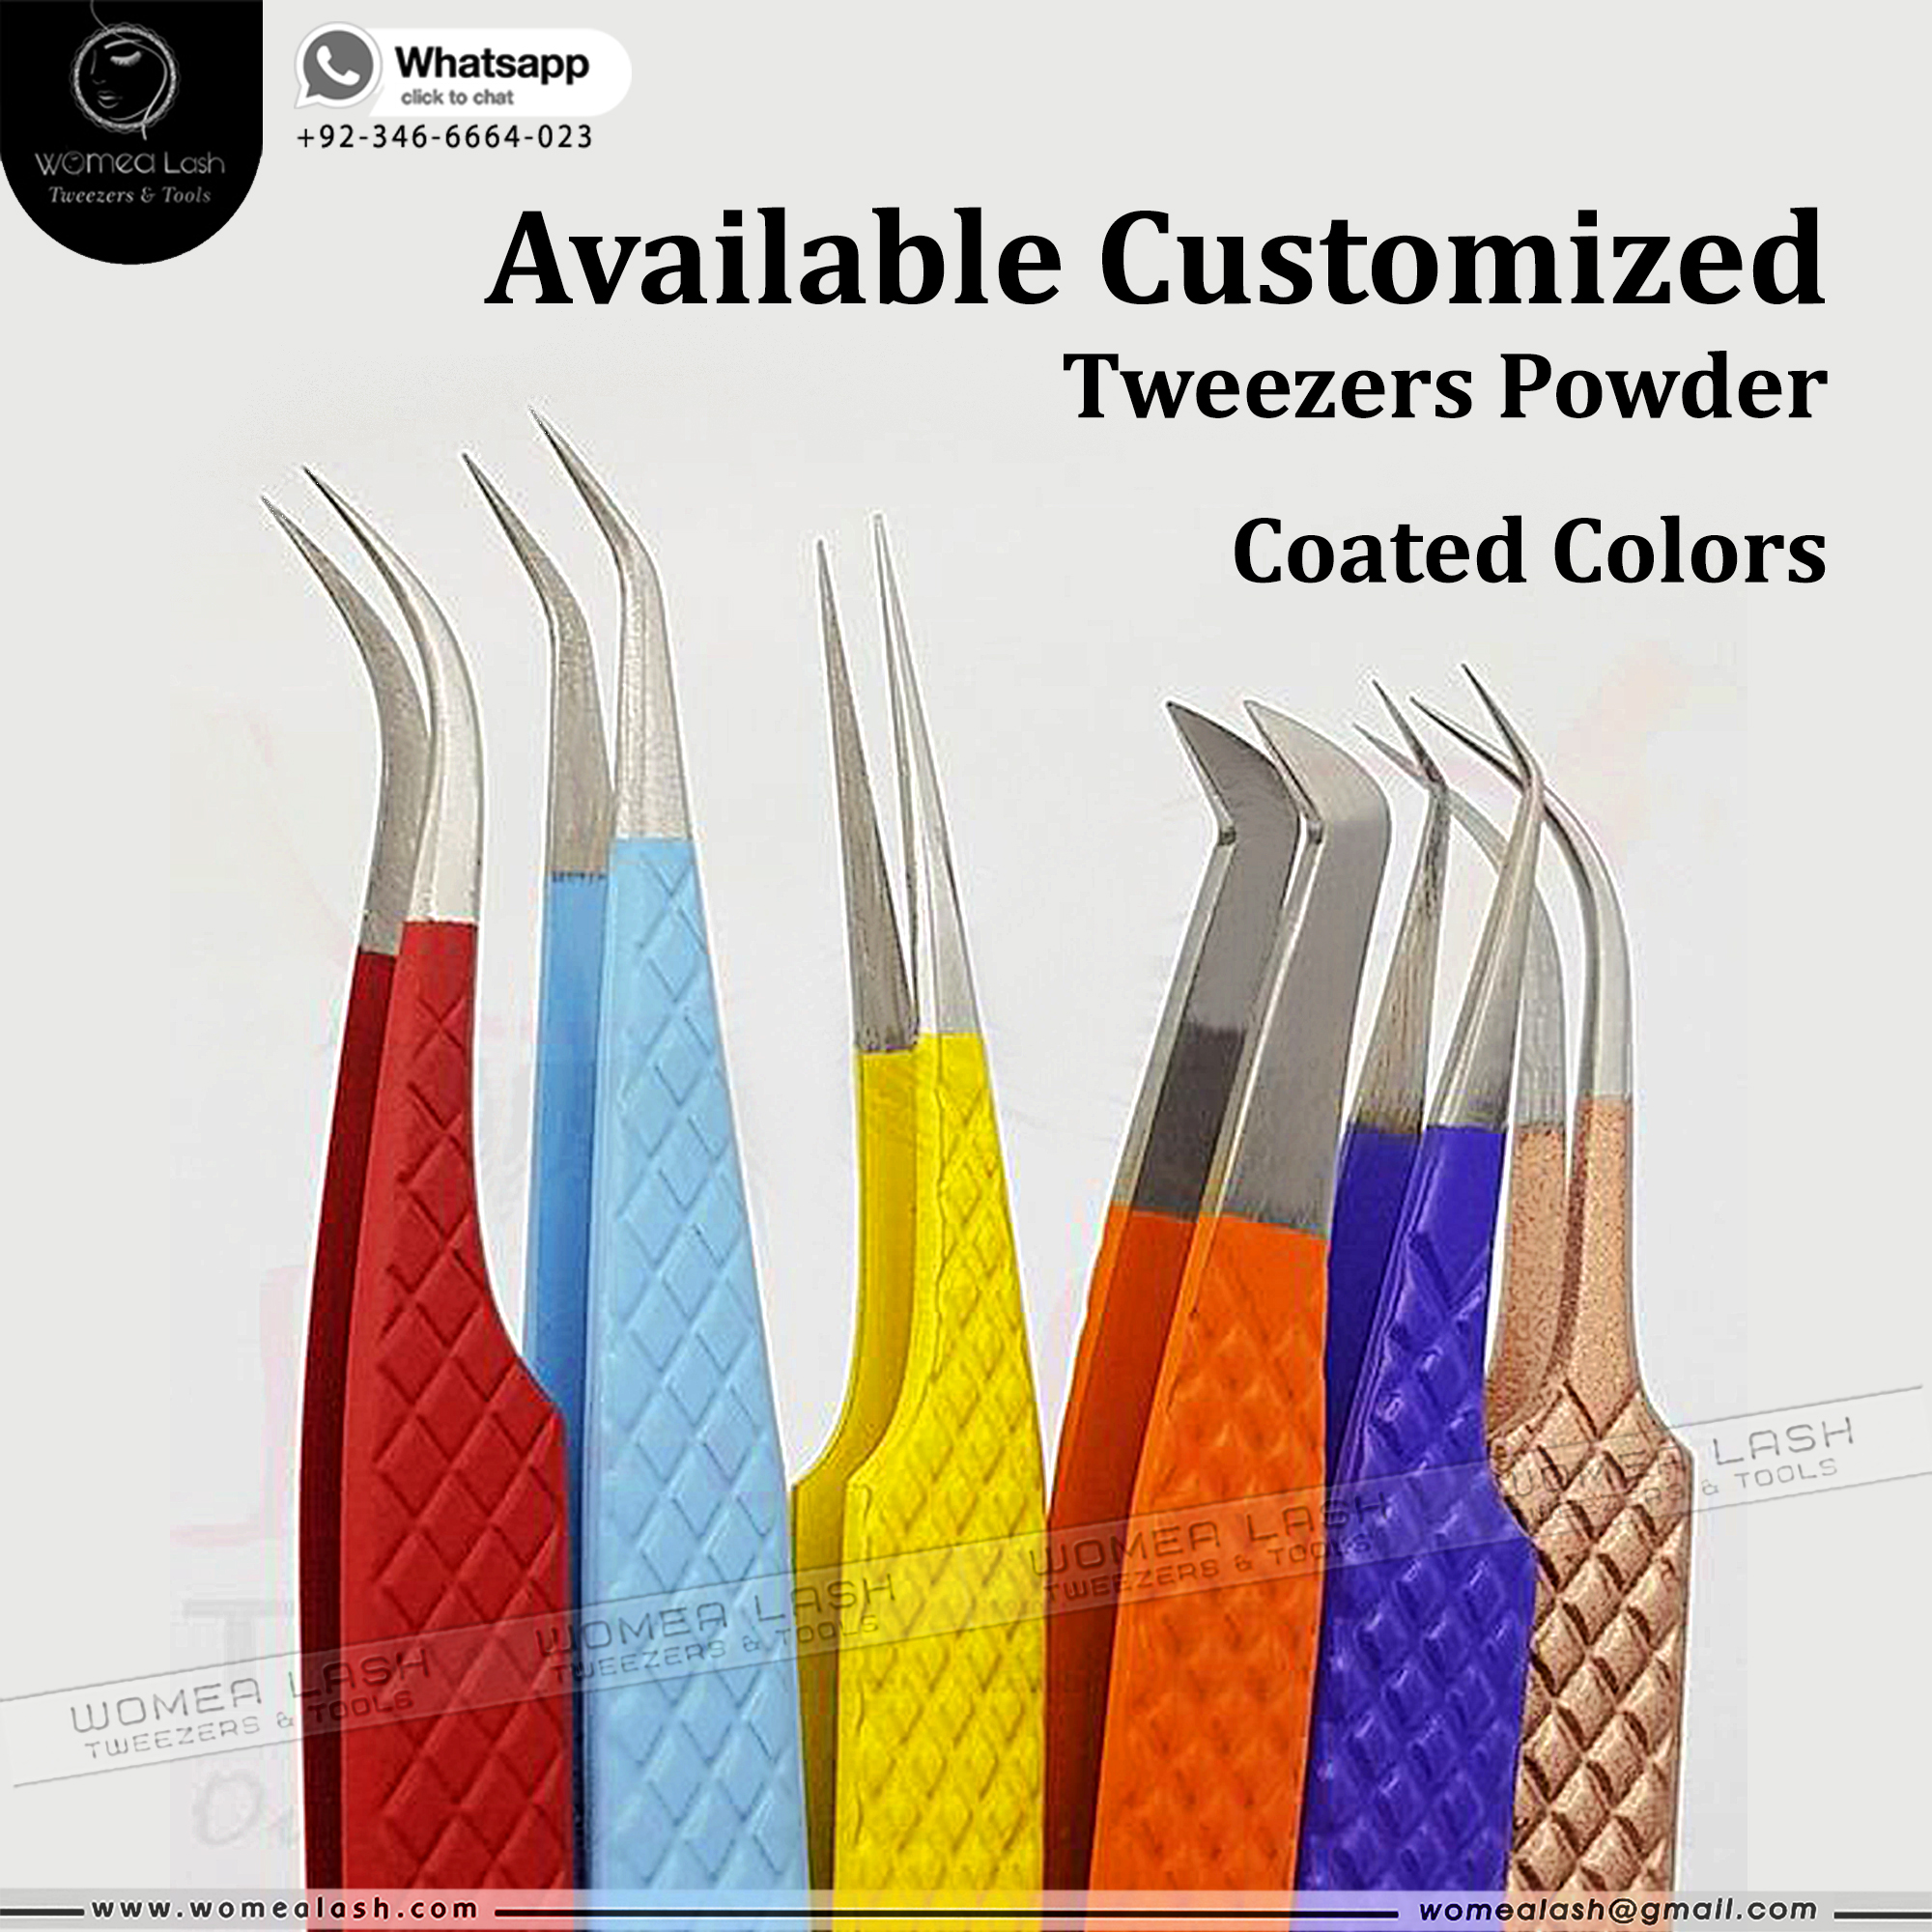 Available Customized Tweezers Powder Coated Colors from Womea Lash Tweezers Company. 